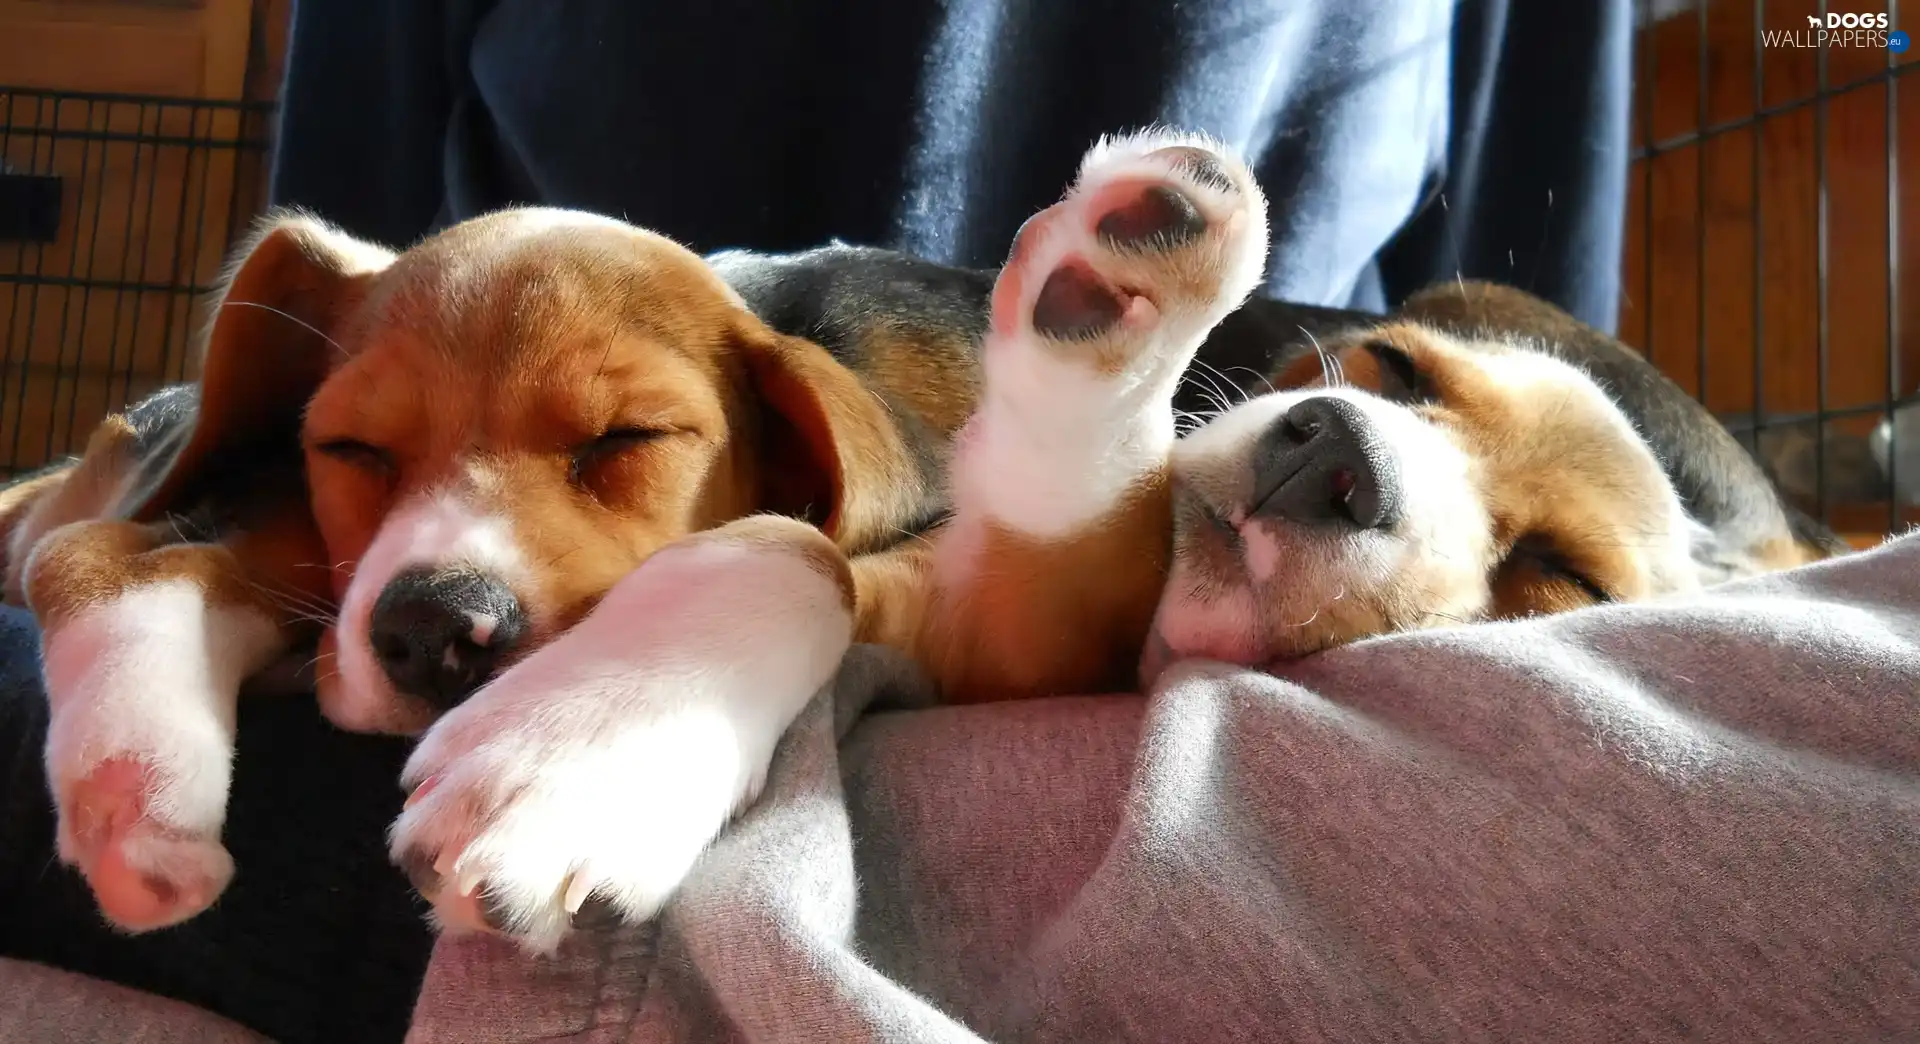 Sleeping, puppies, Two cars - Dogs wallpapers: 1600x870